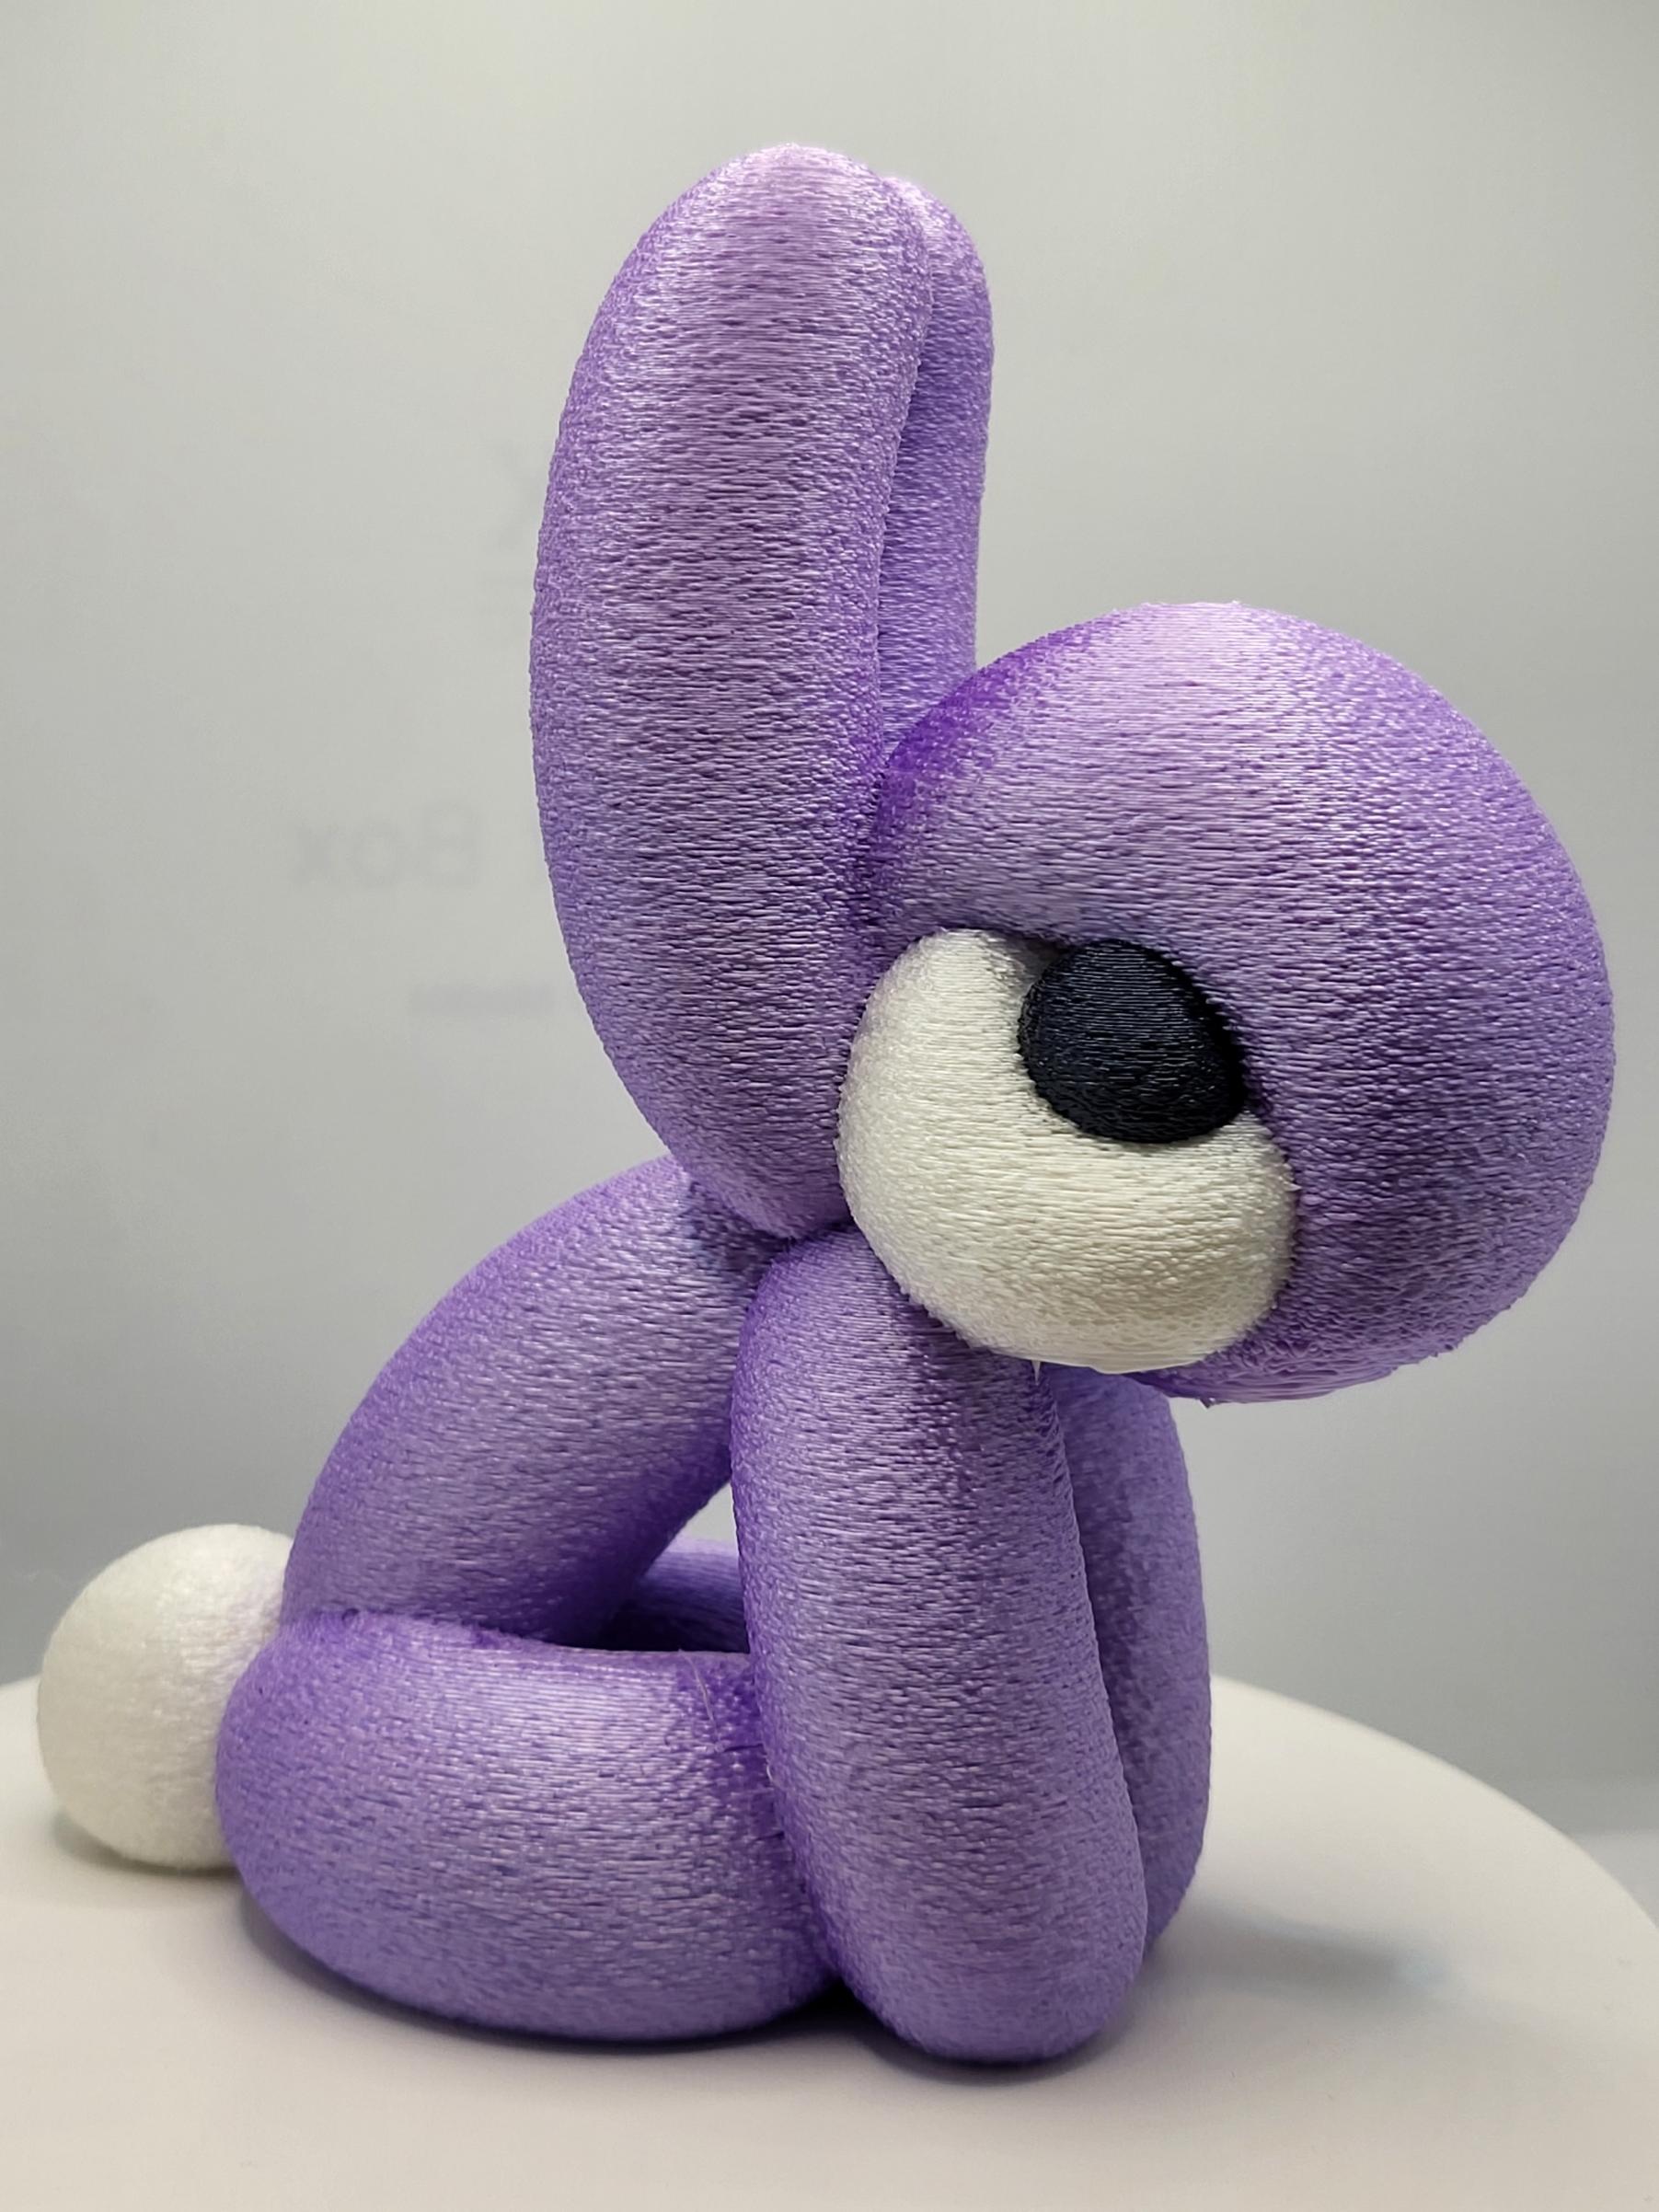 Balloon Bunny - Printed the model for my Niece, in silk pla, 16hrs  on the X1C with fuzzy skin turned on. Thank you, Chelsey.  - 3d model